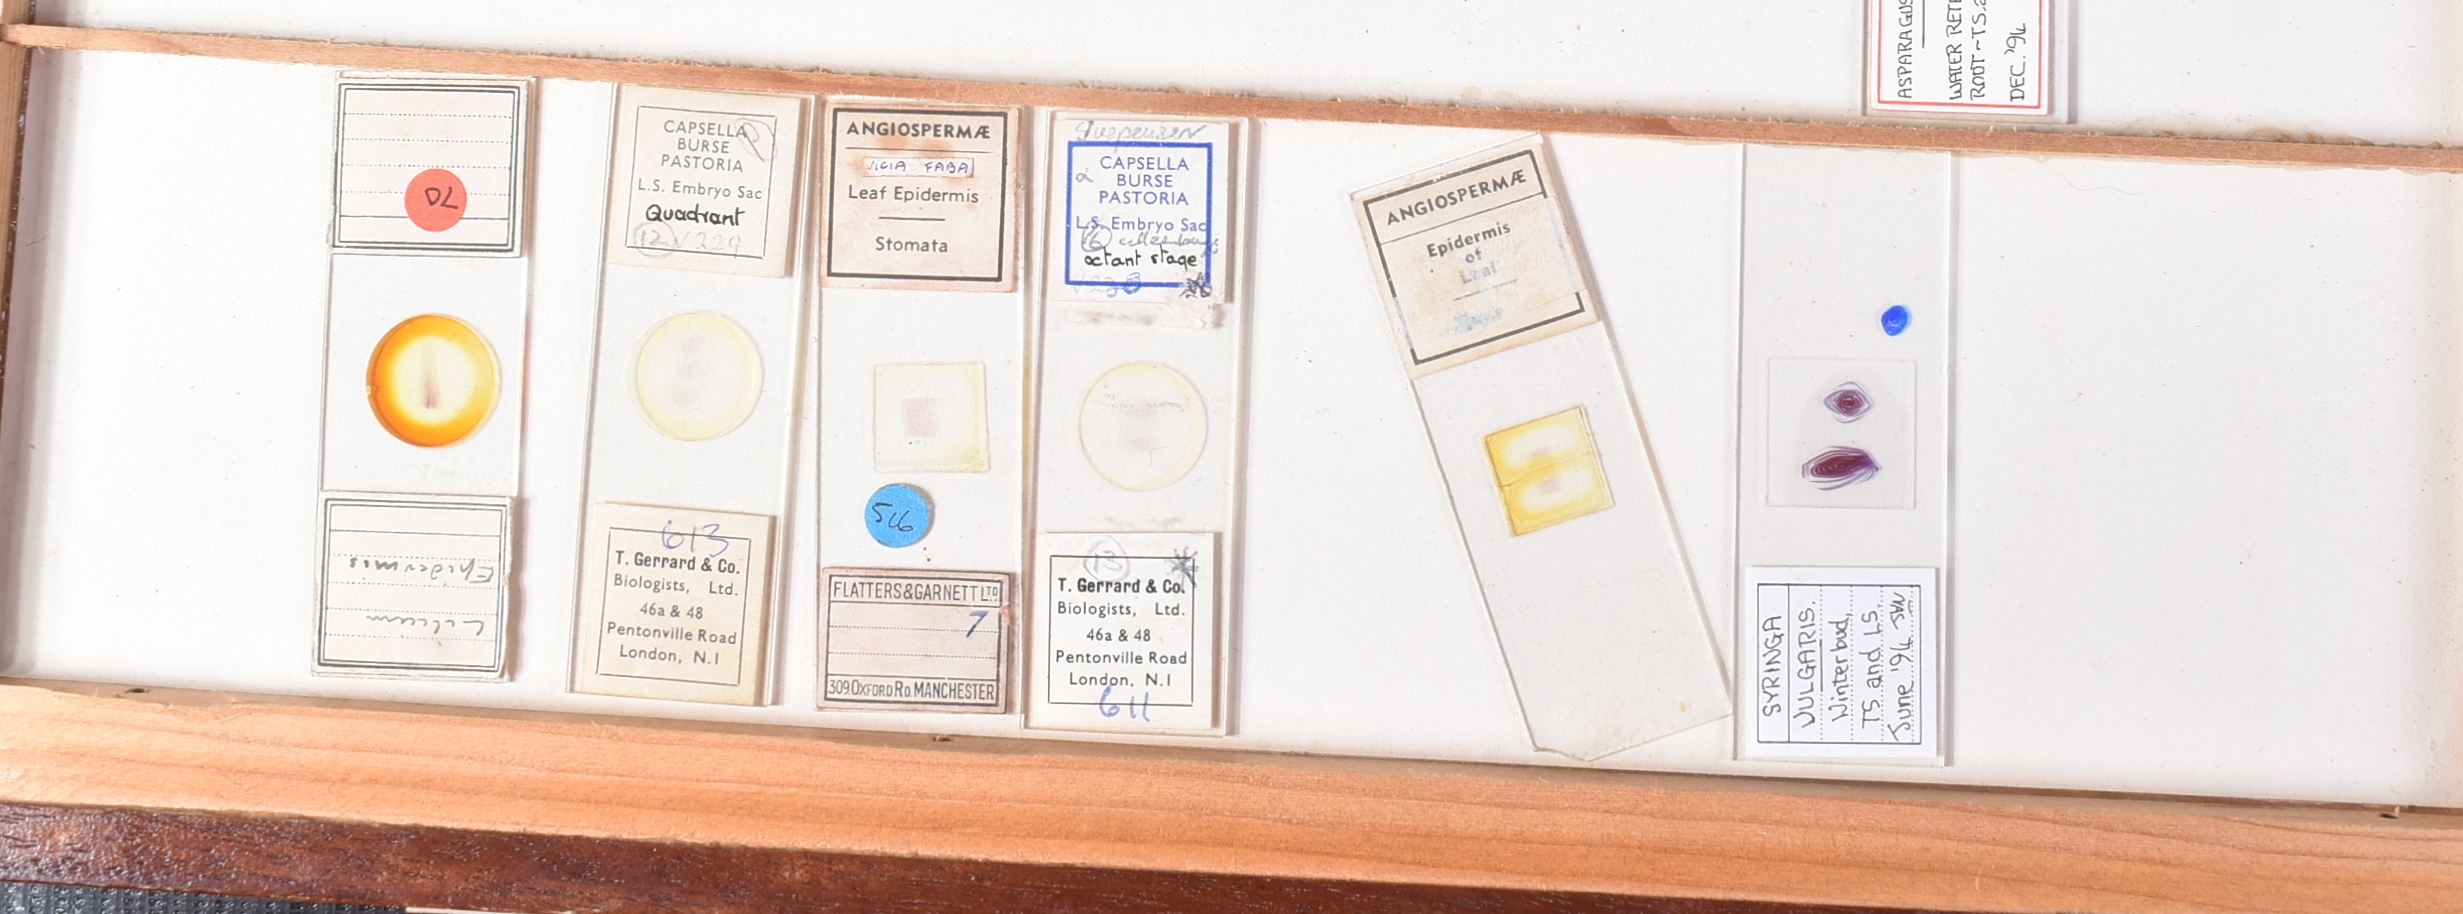 LARGE & EXTENSIVE BECK CABINET MICROSCOPE SLIDE COLLECTION - Image 19 of 101